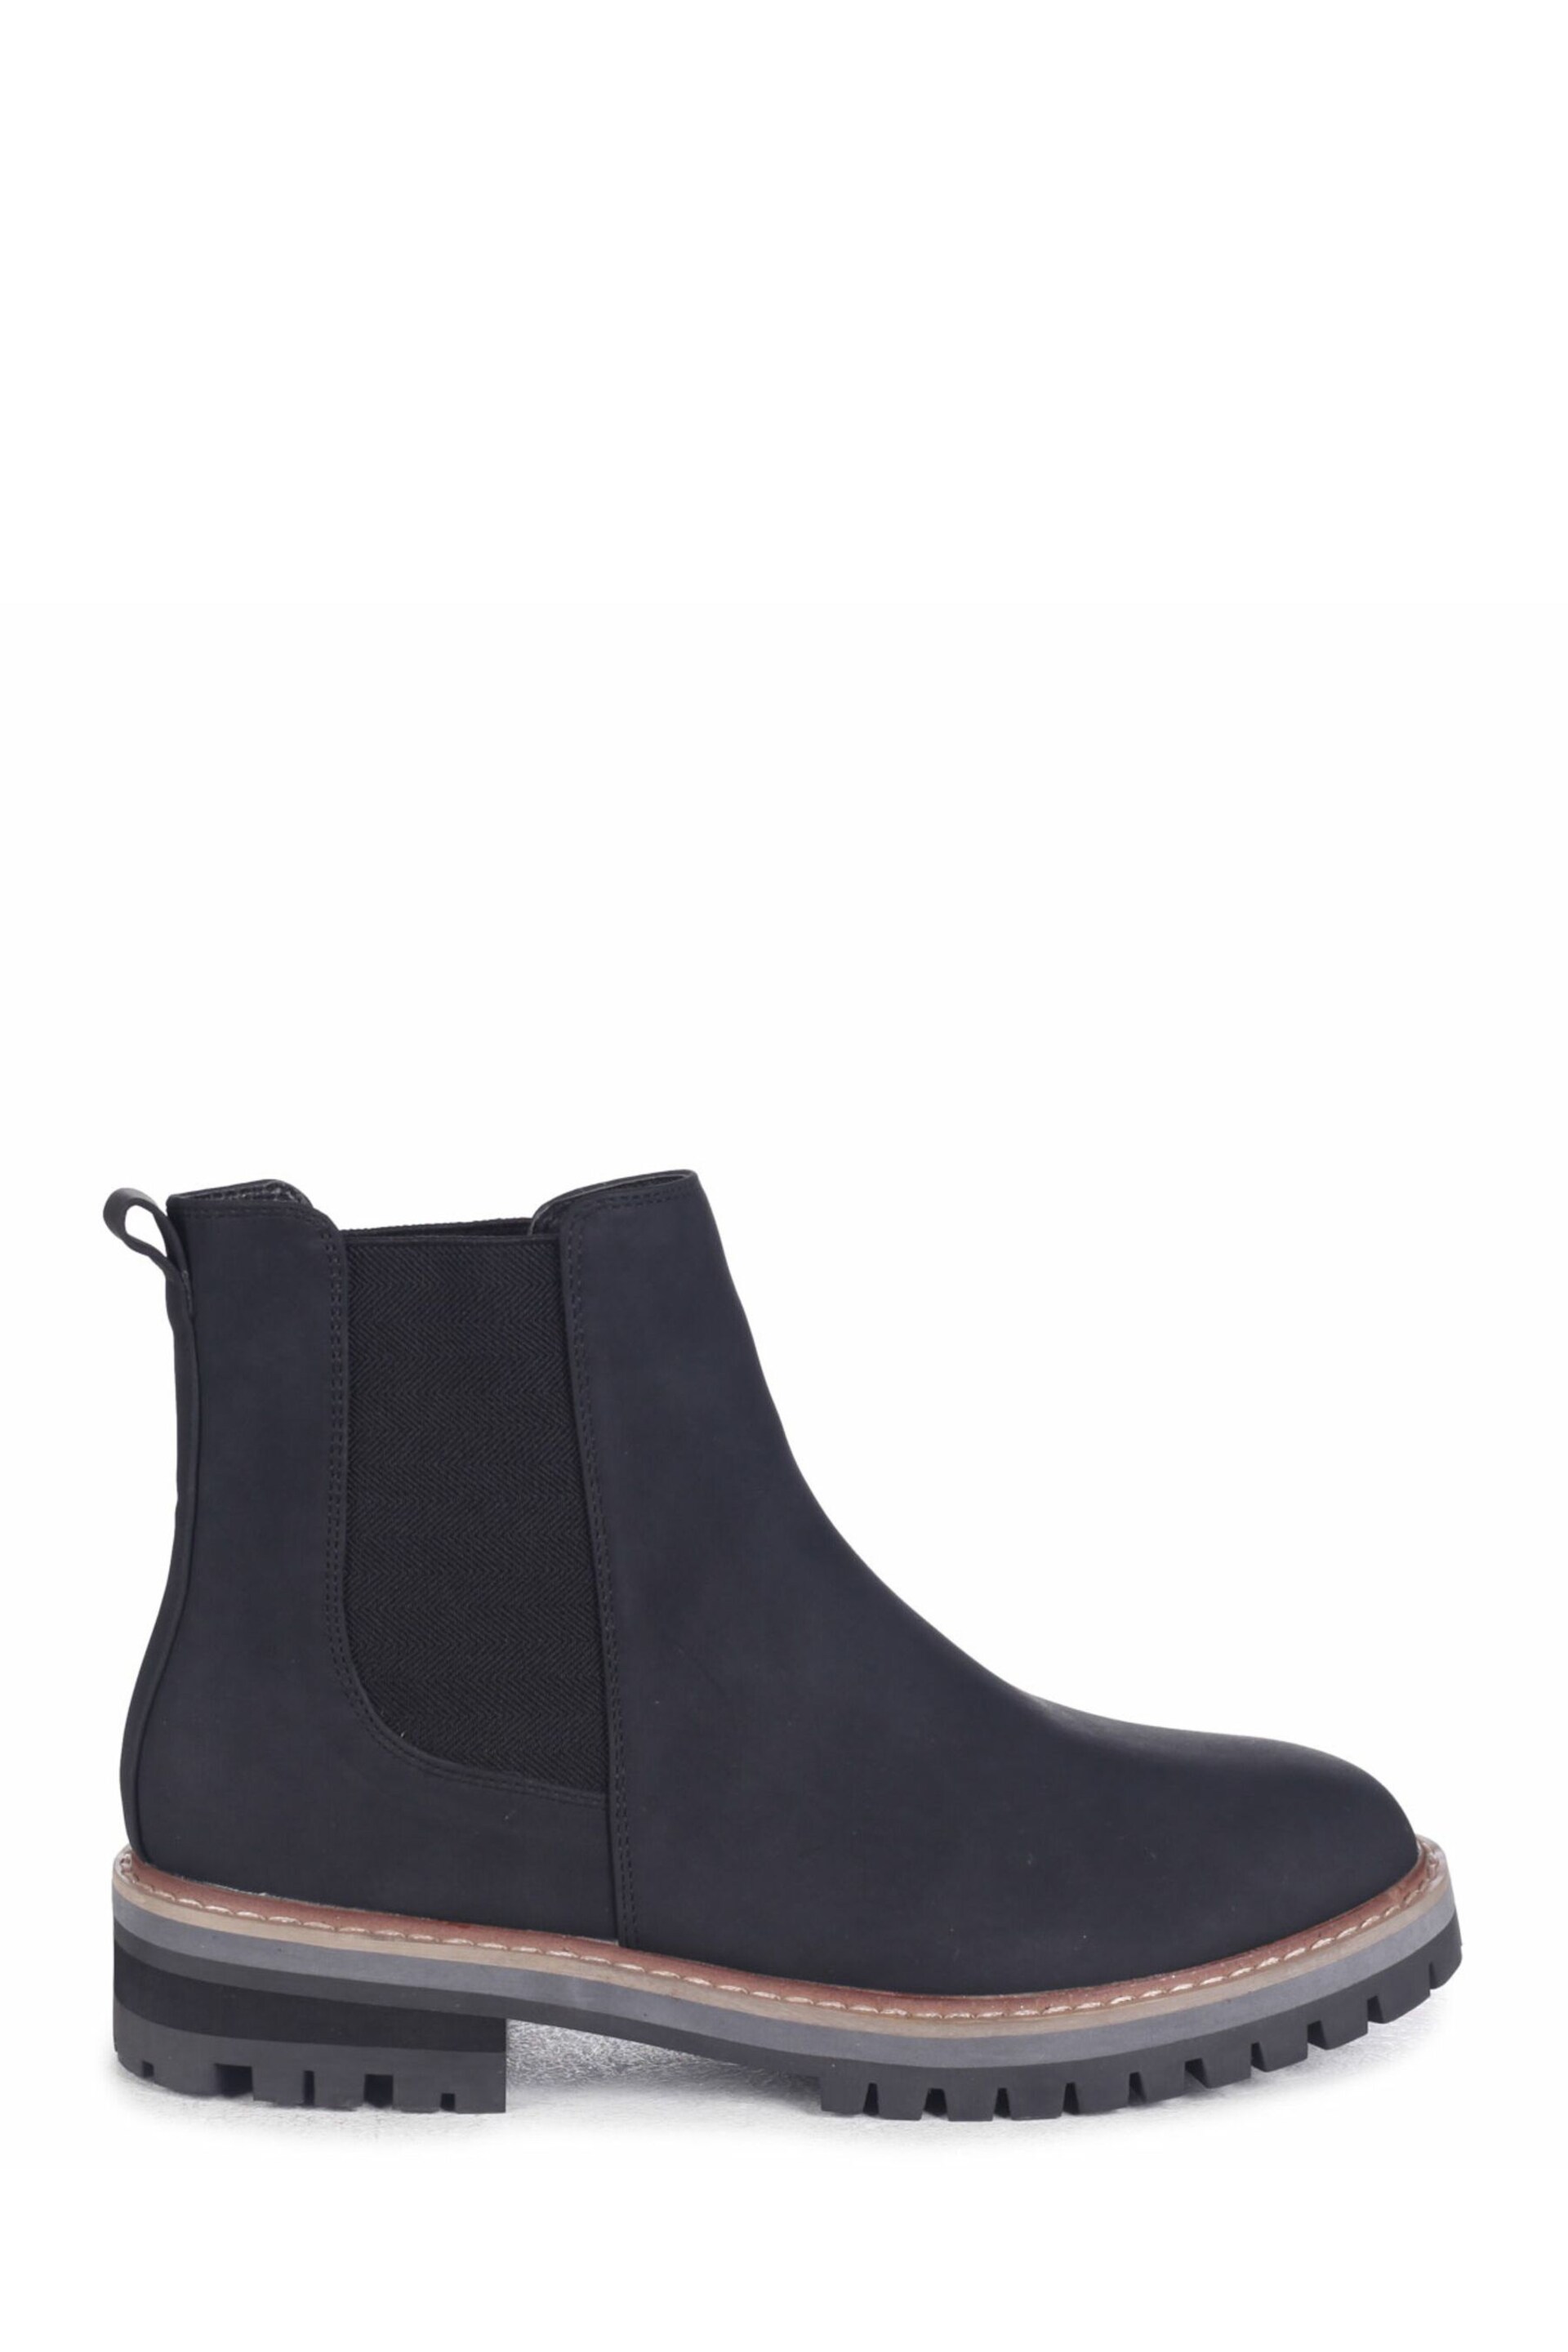 Linzi Black Classic Pull On Casual Chelsea Boots - Image 2 of 4